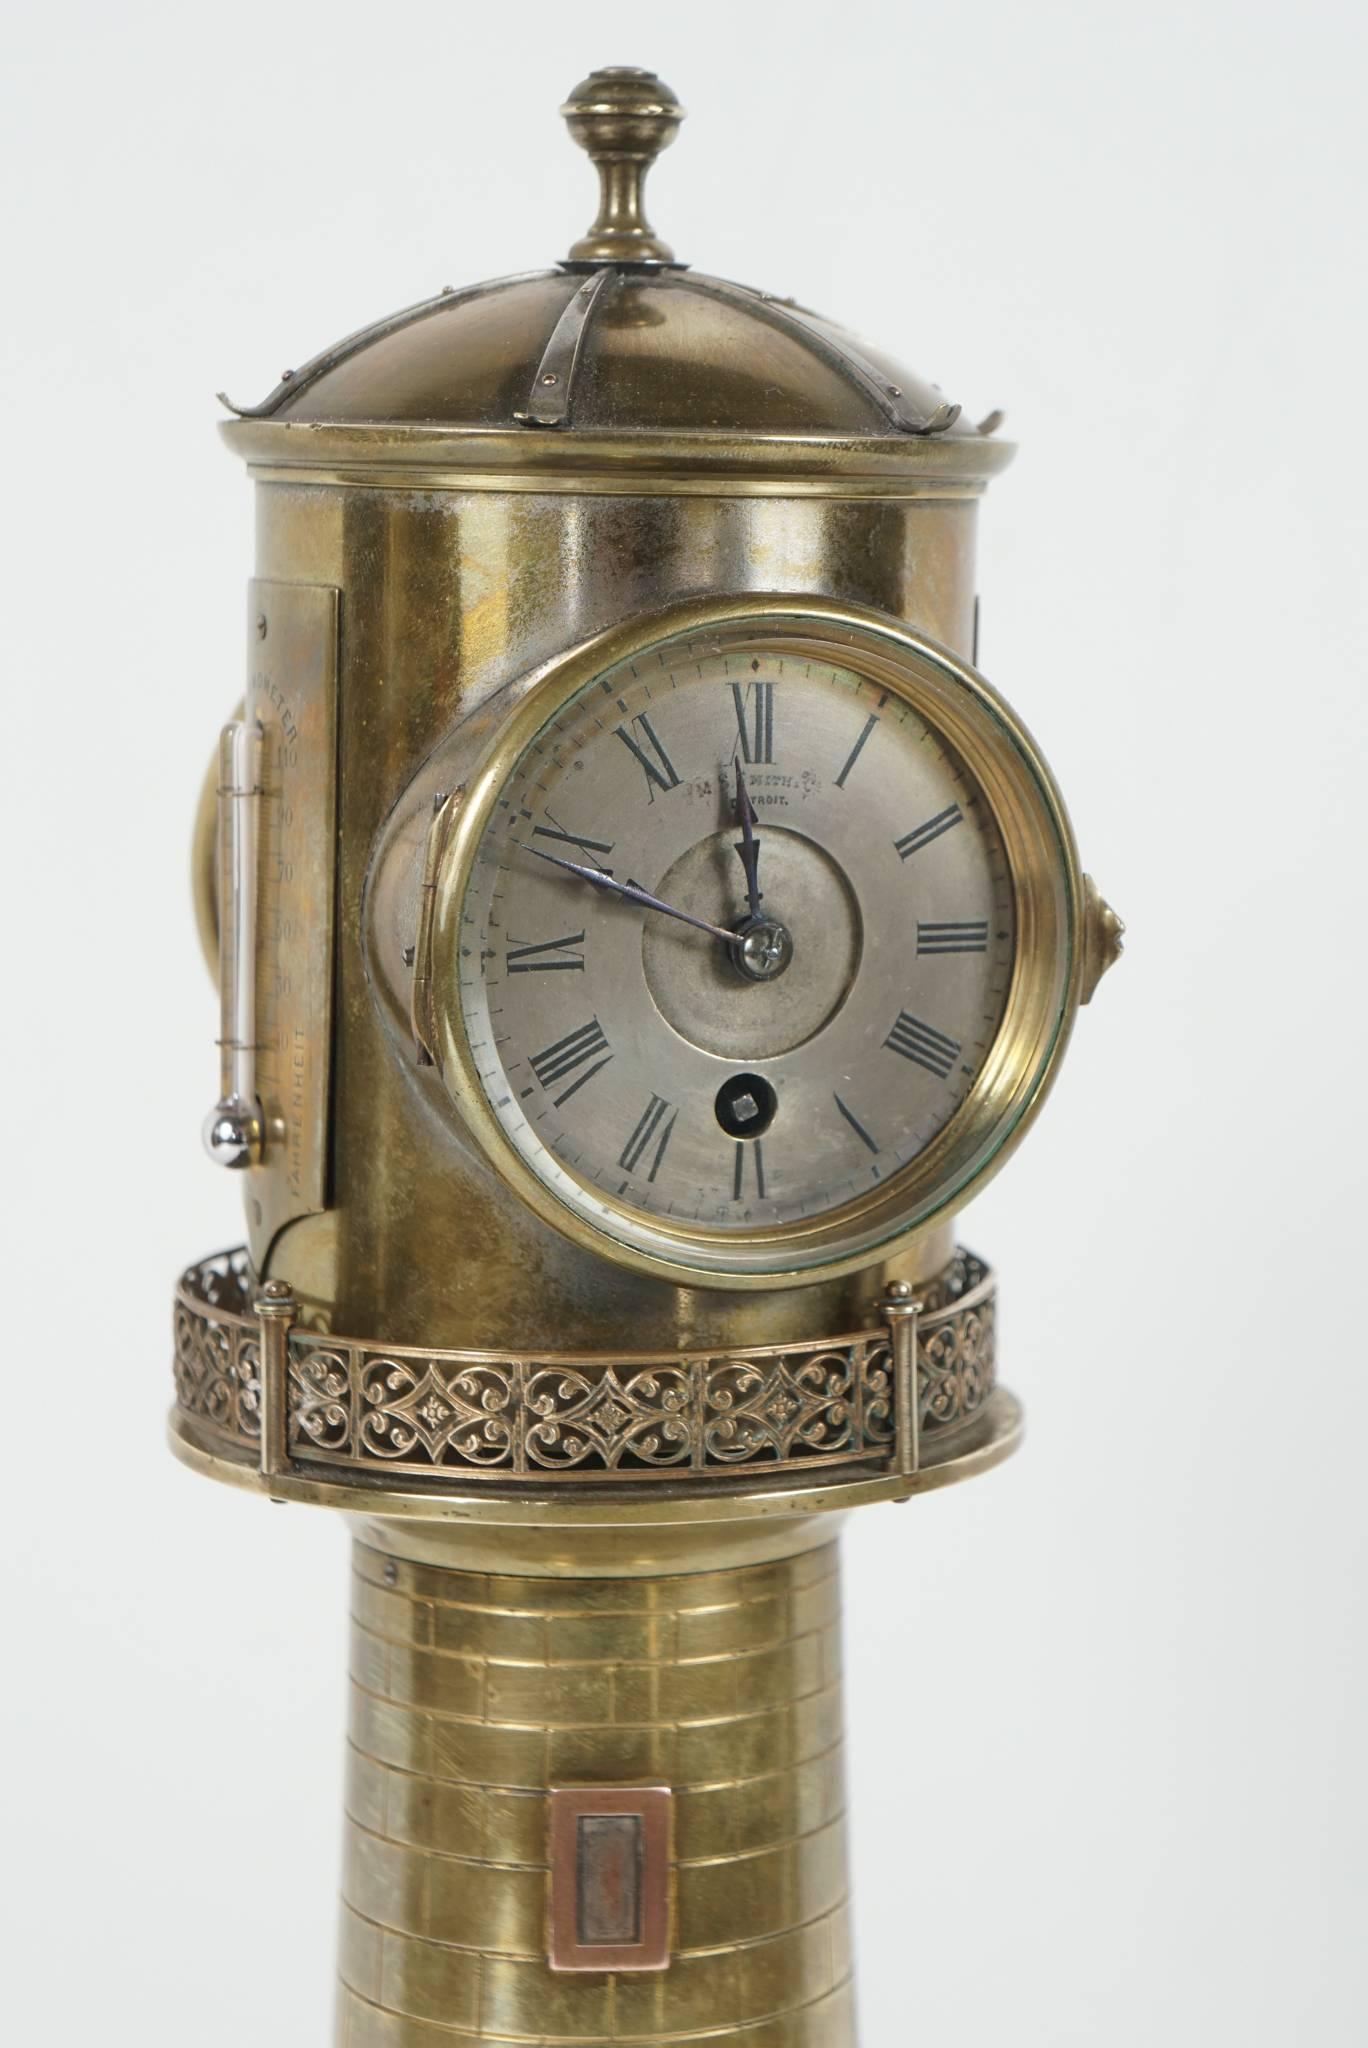 This lighthouse clock crafted by Andre Romain Guilmet in Paris, circa 1880 is made of bronze, copper and was silvered in areas. The clock works with an eight-day movement housed in the top or lighthouse section and is opposed by a barometer within